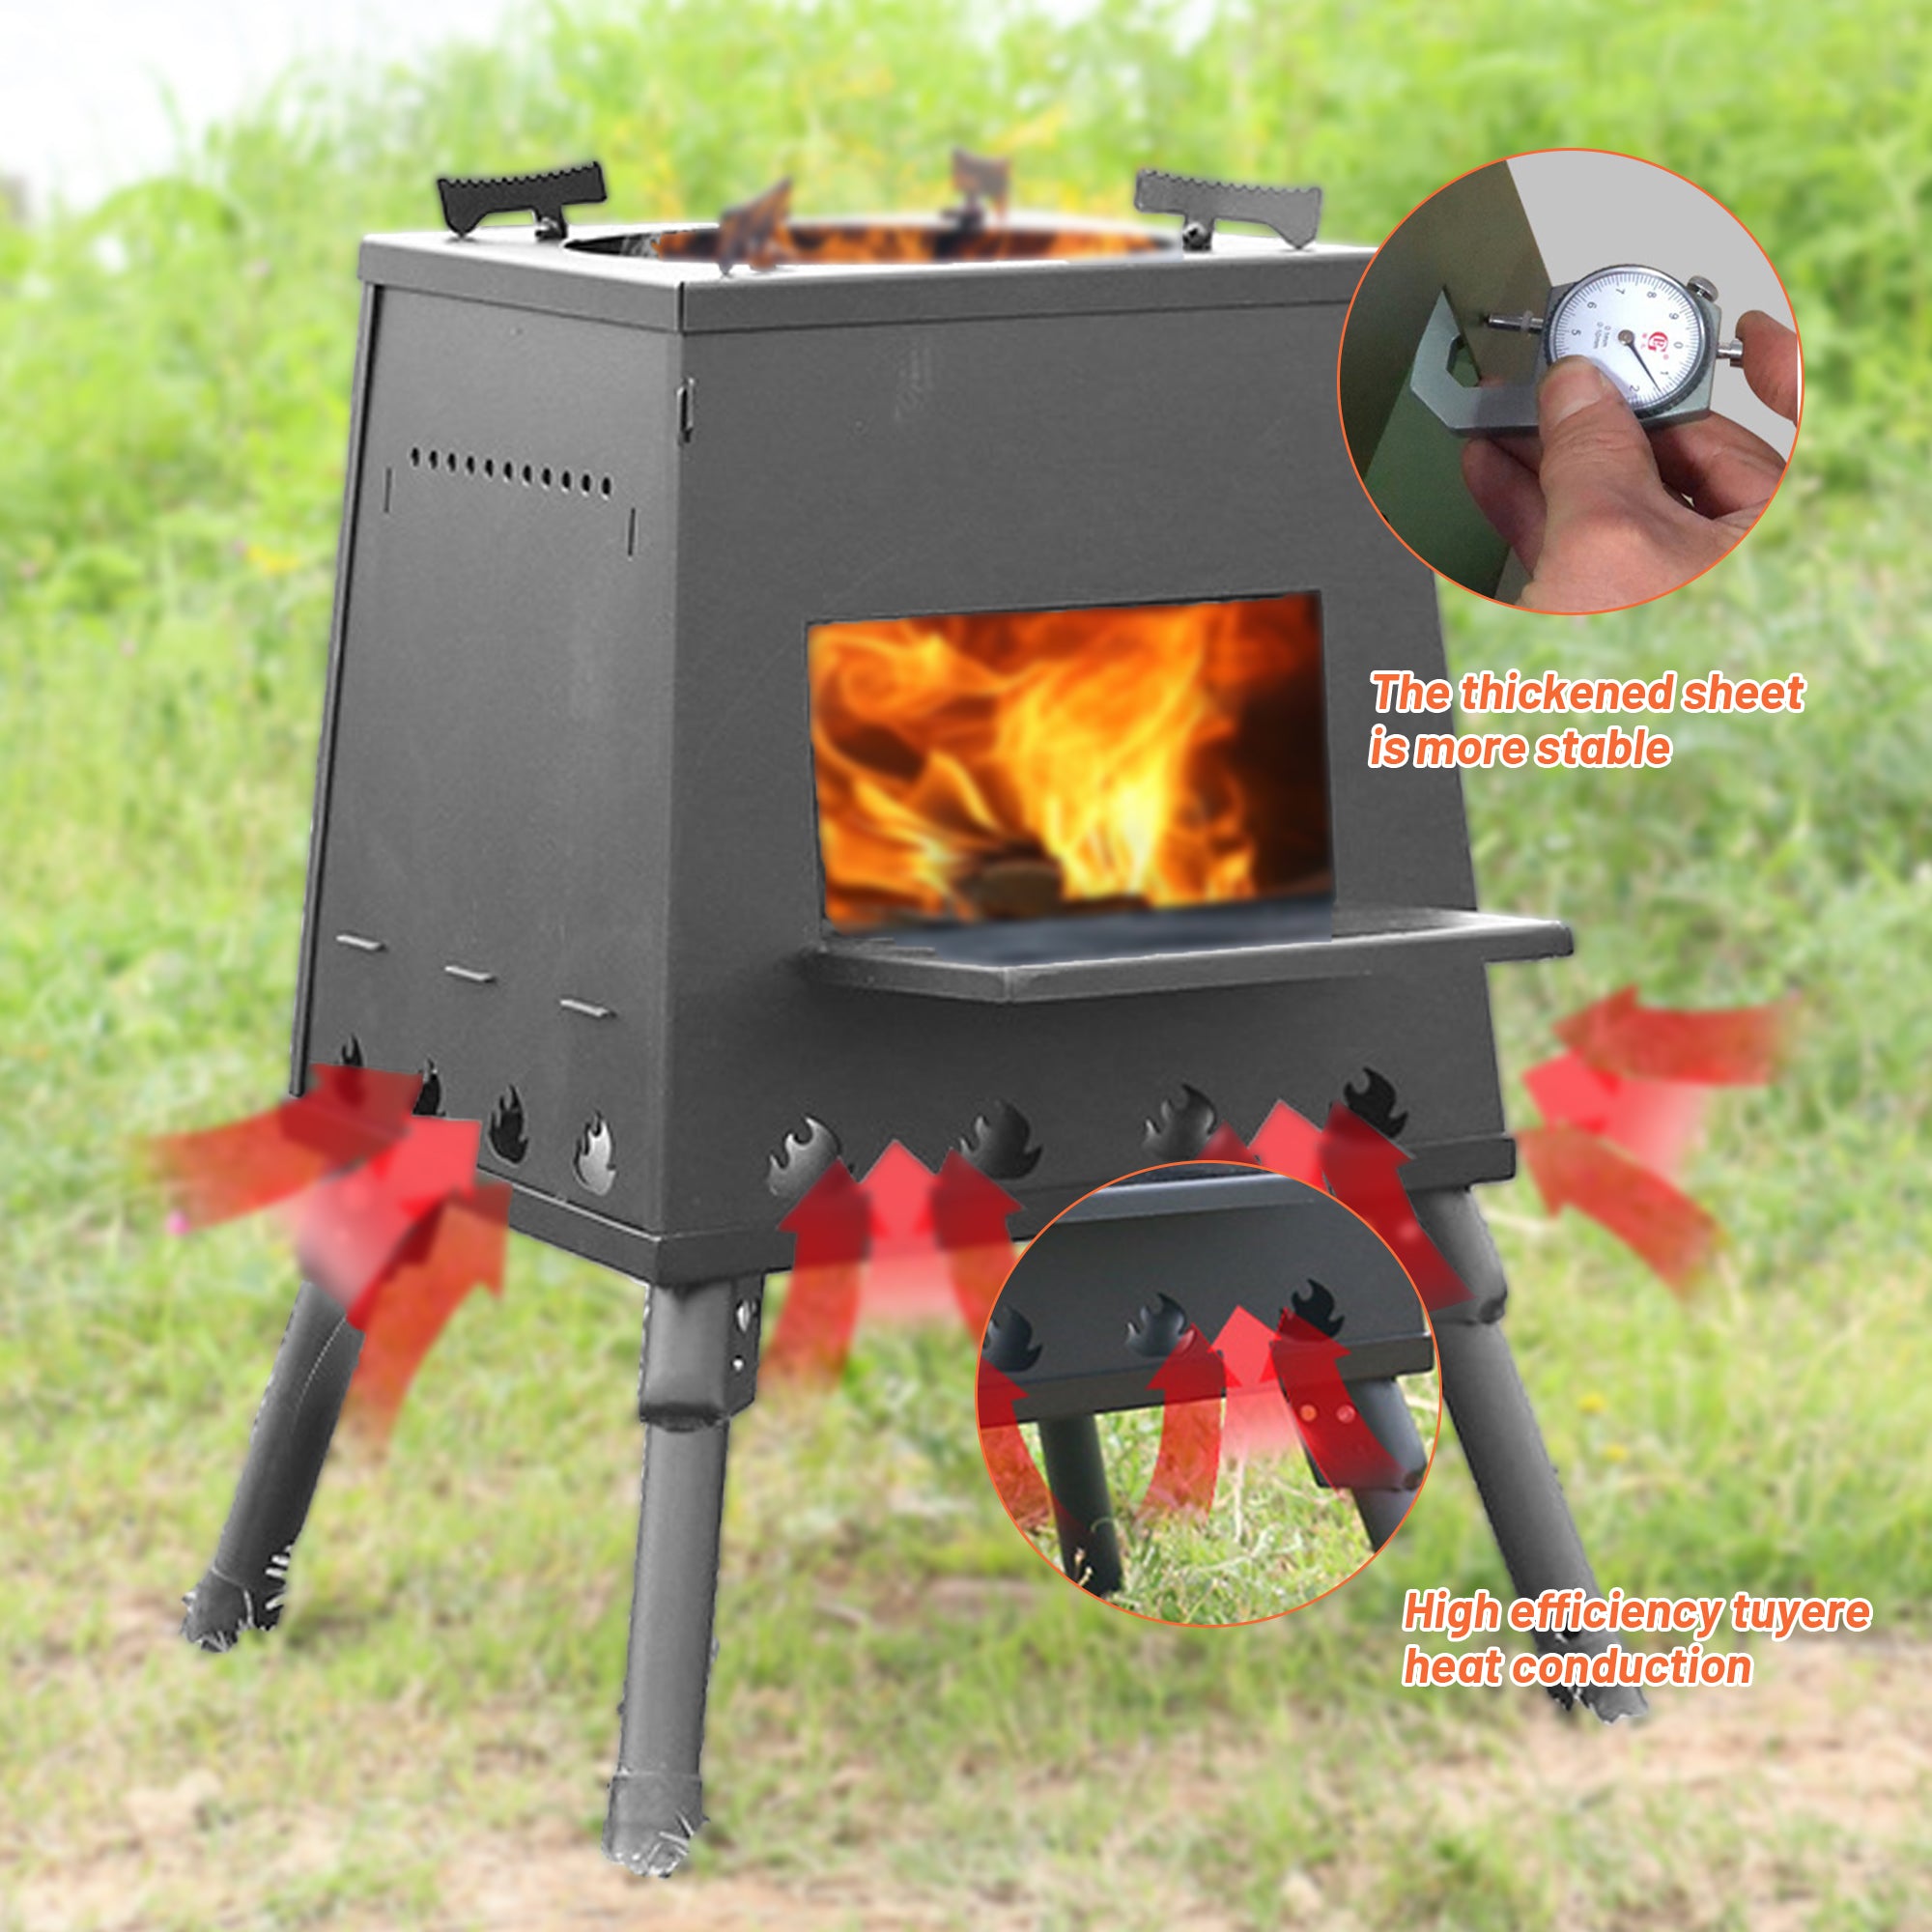 Portable Stainless Steel Wood Burning Stove, Lightweight Design, 4